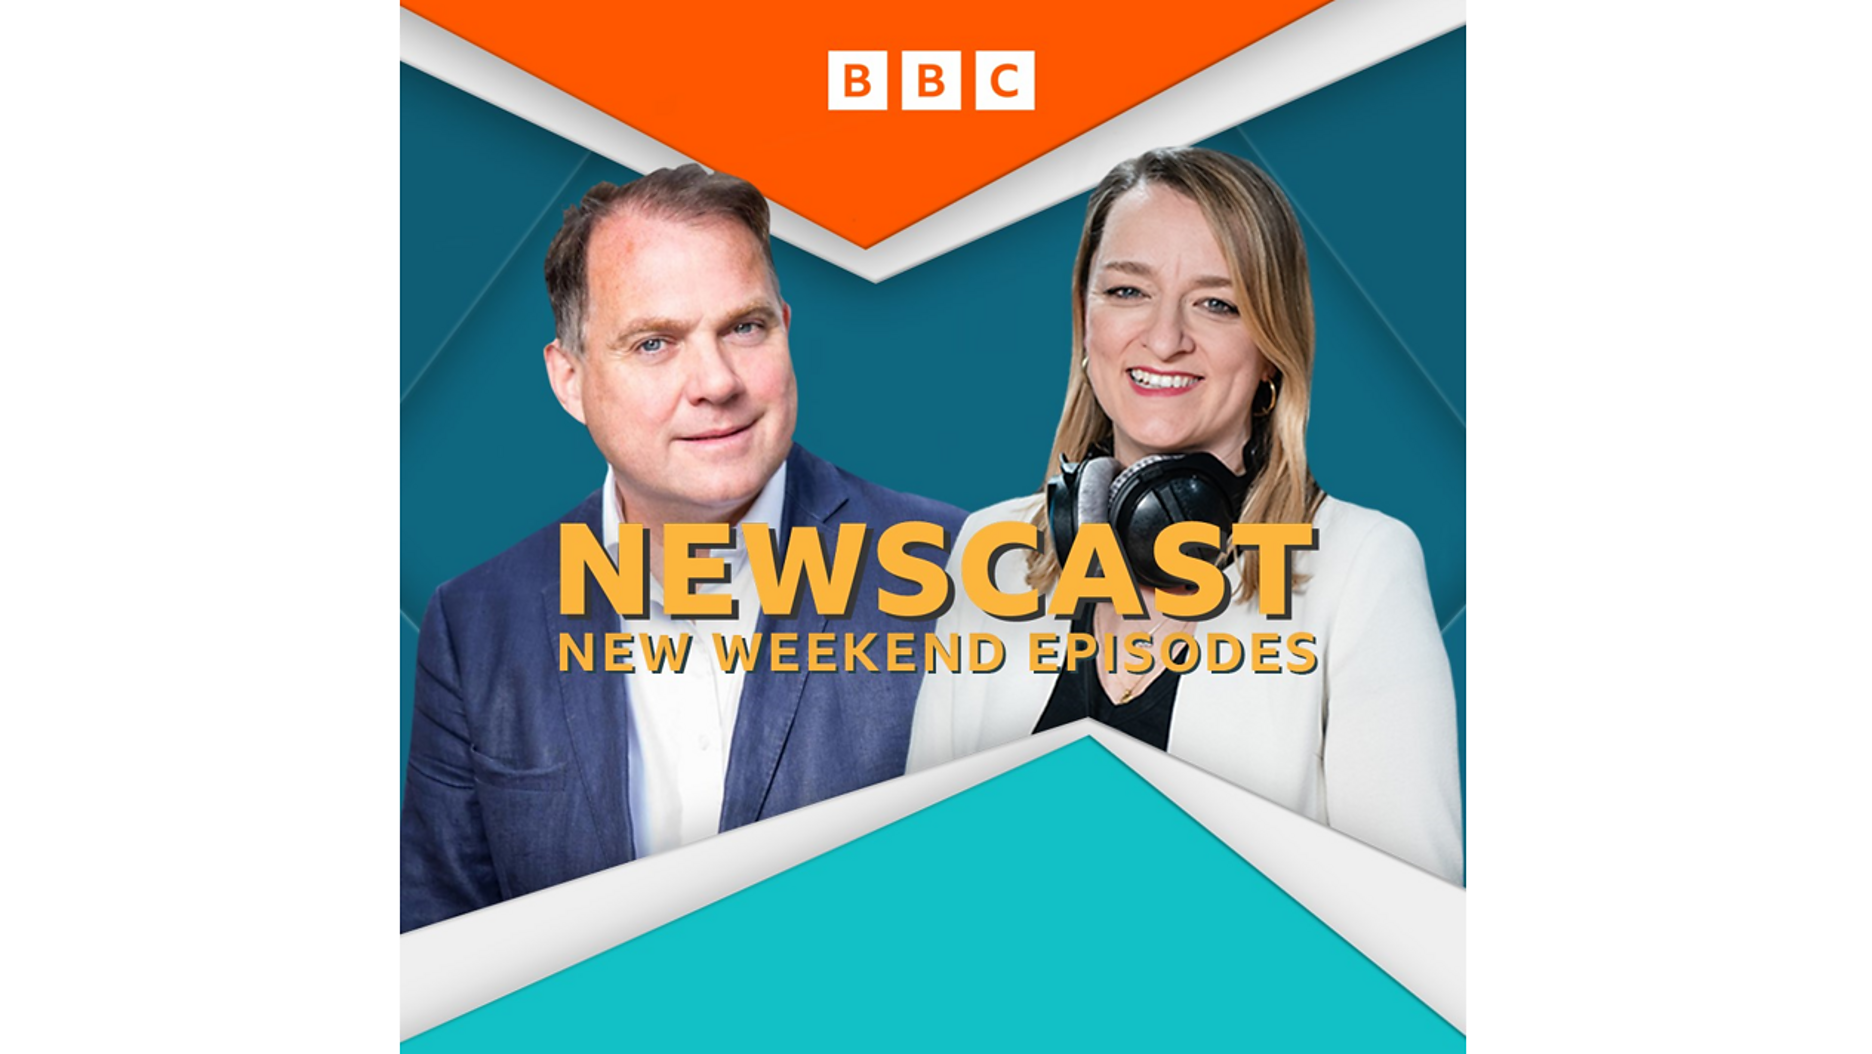 Laura Kuenssberg and Paddy O’Connell join Newscast for new weekend episodes